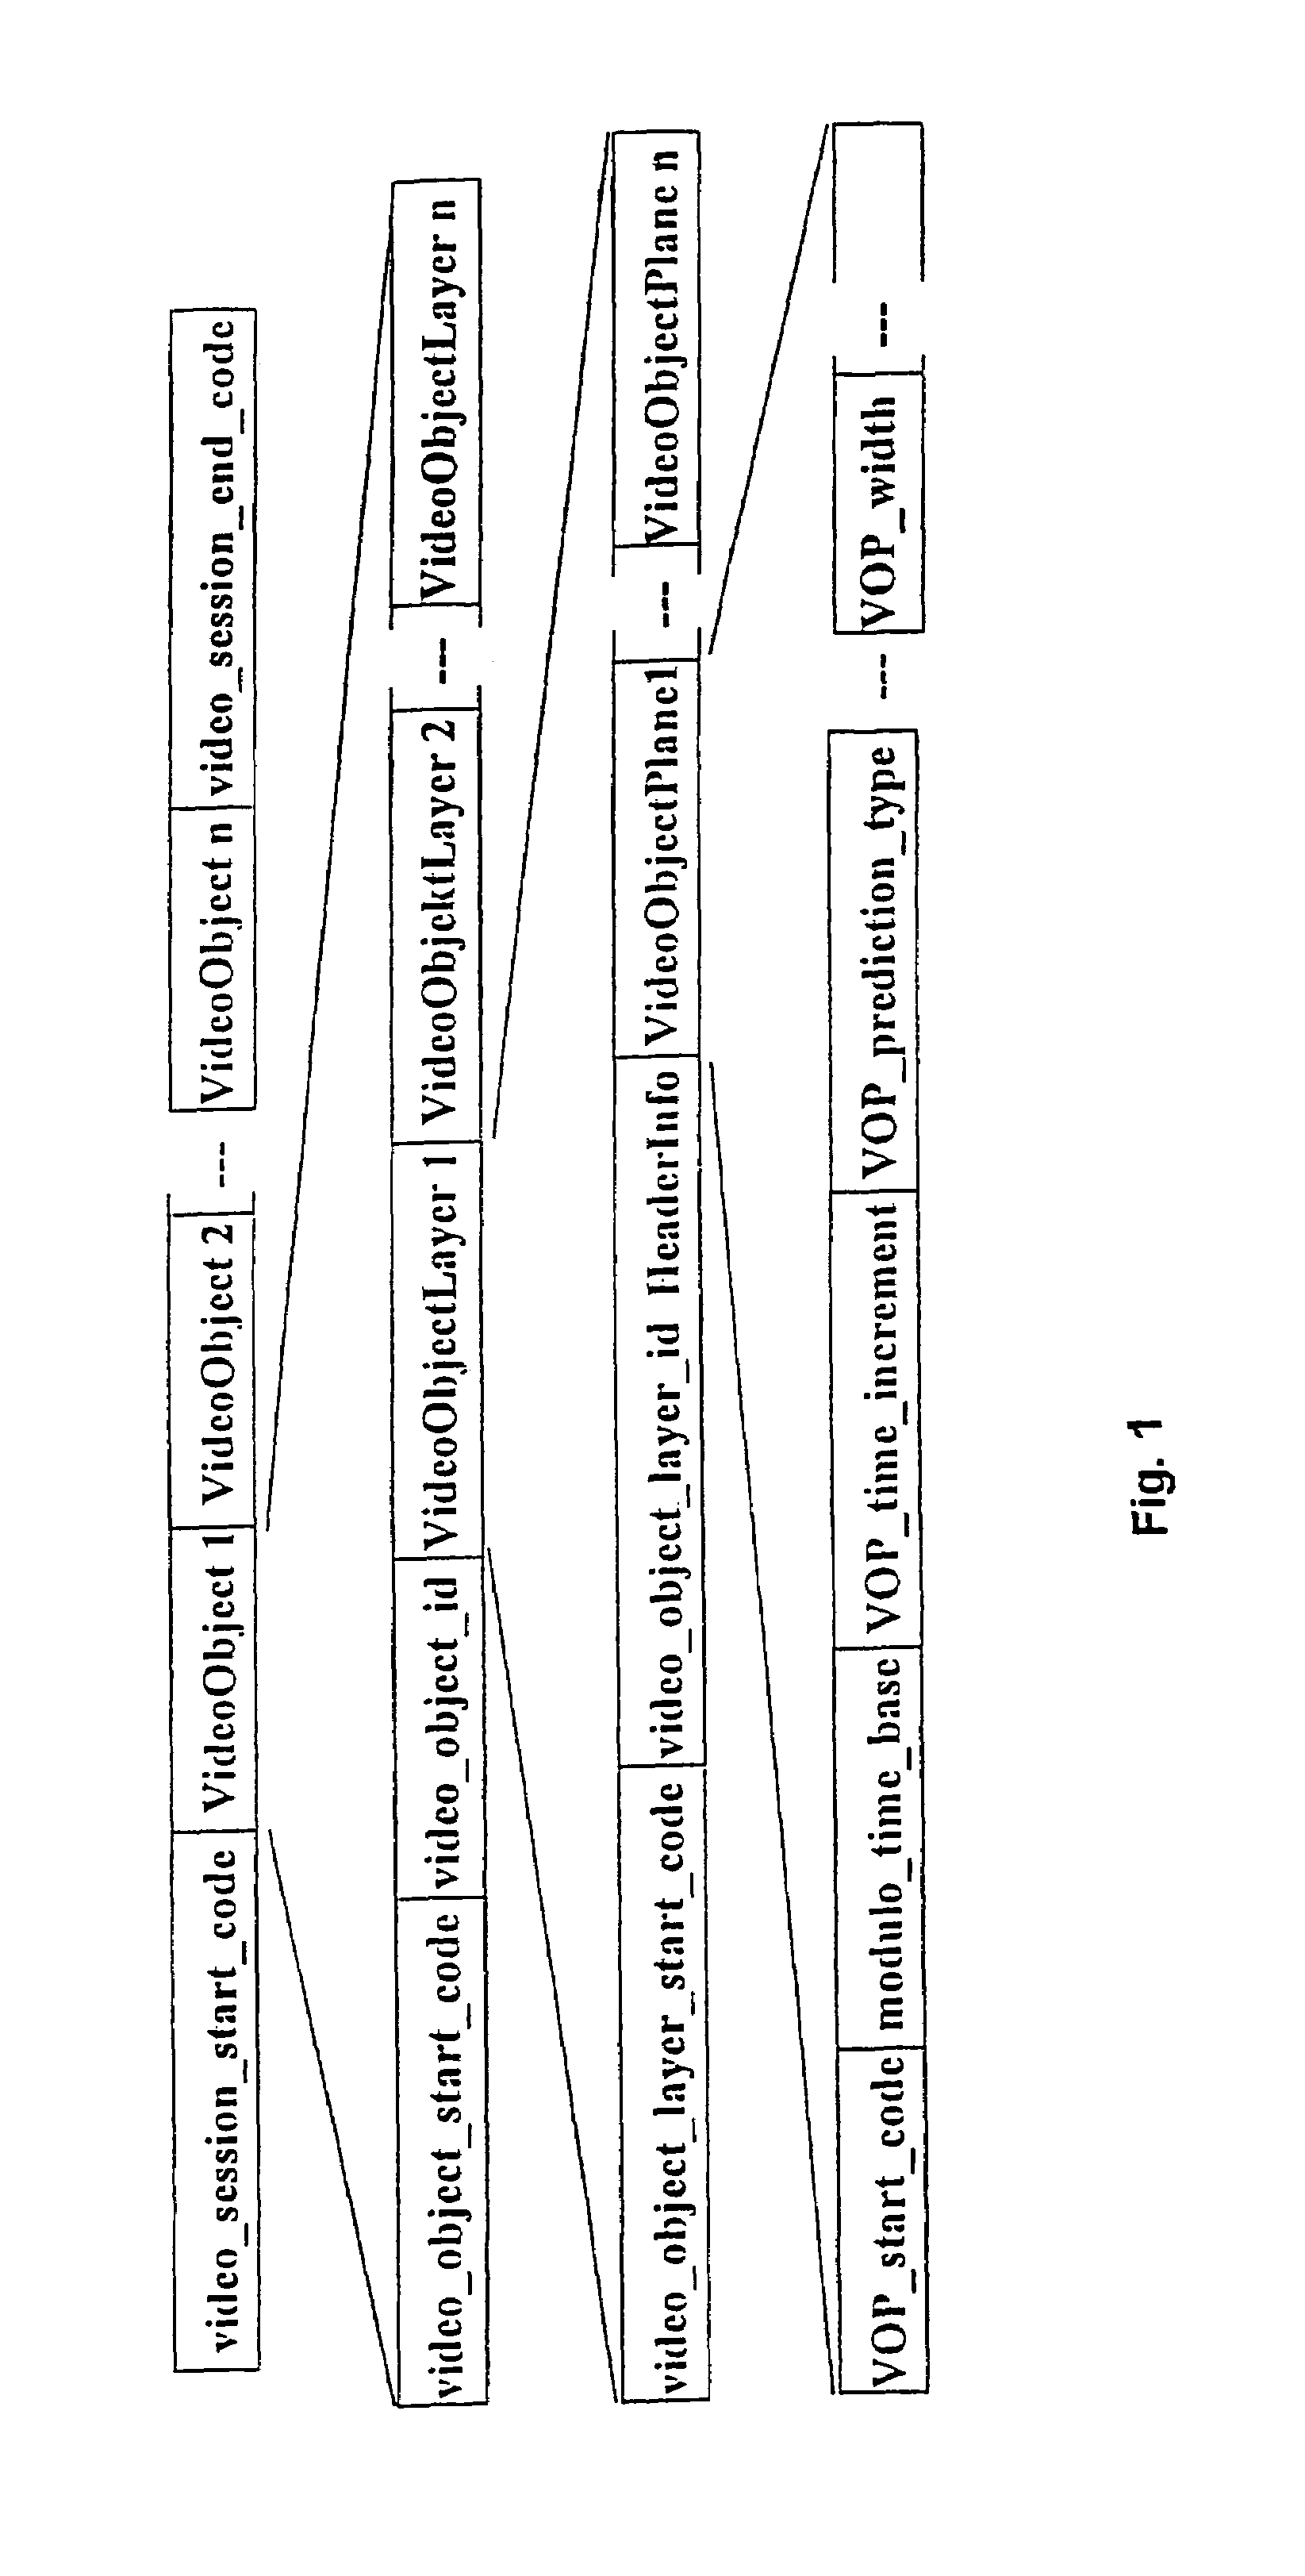 Method for formatting a data flow by coding based on the sequence objects of animated images